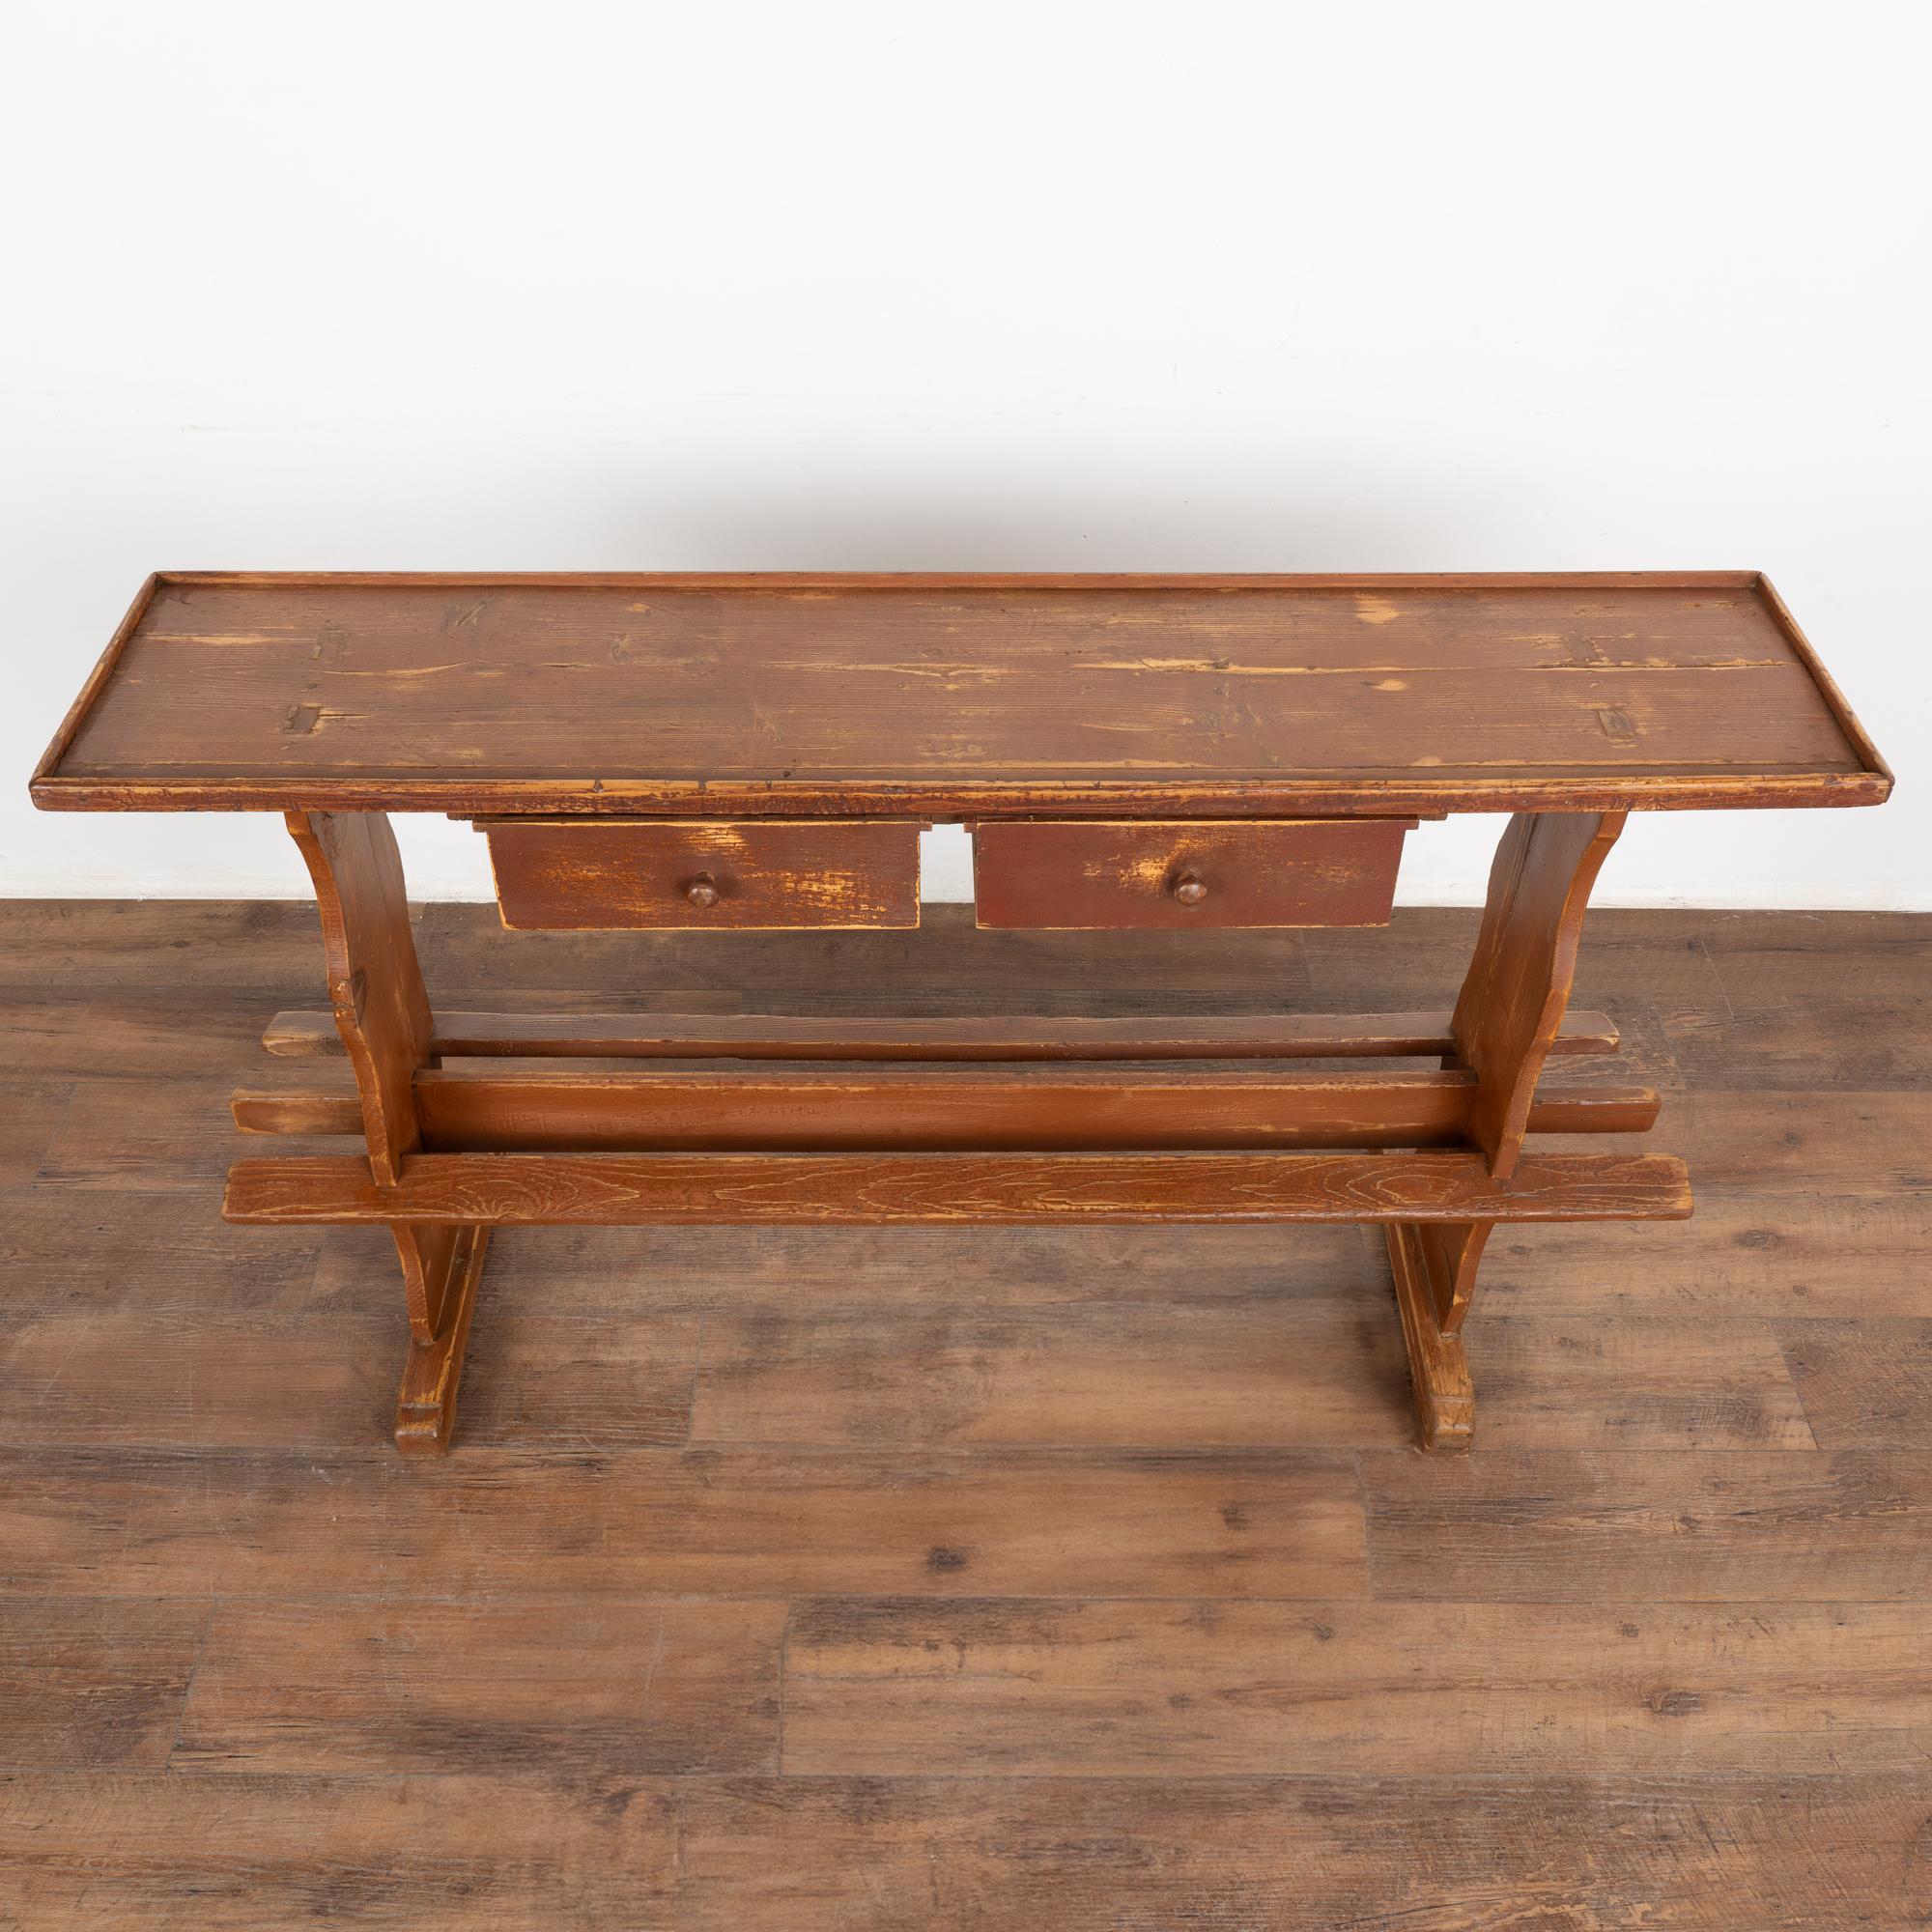 Wood Rustic Brown Narrow Console Table, Hungary circa 1900 For Sale